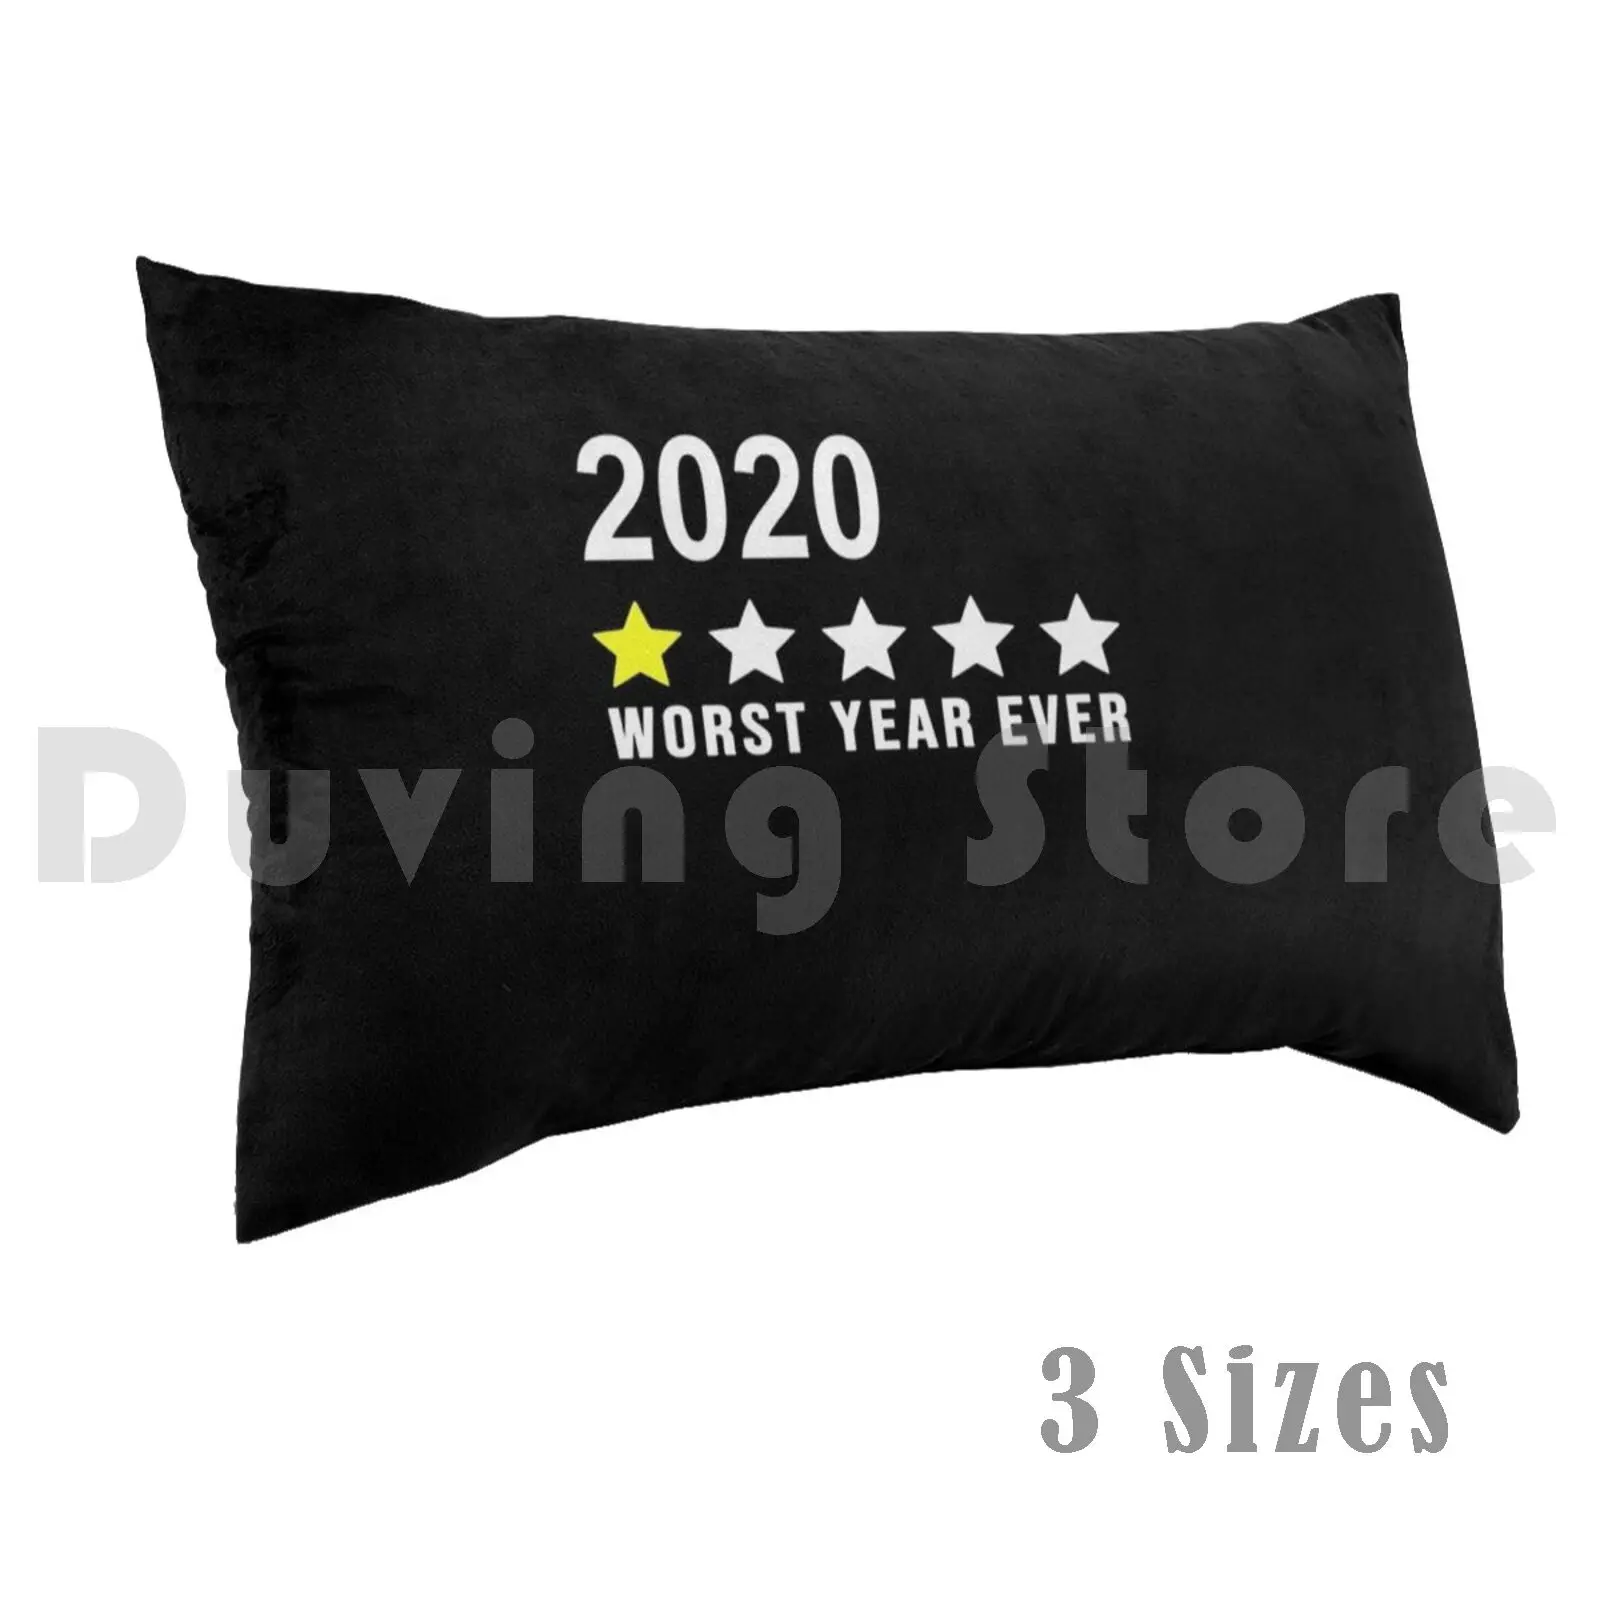 

2021 Worst Year Ever Pillow Case Printed 35x50 2021 One Star Very Bad 2021 One Star 2021 One Star Rating 2021